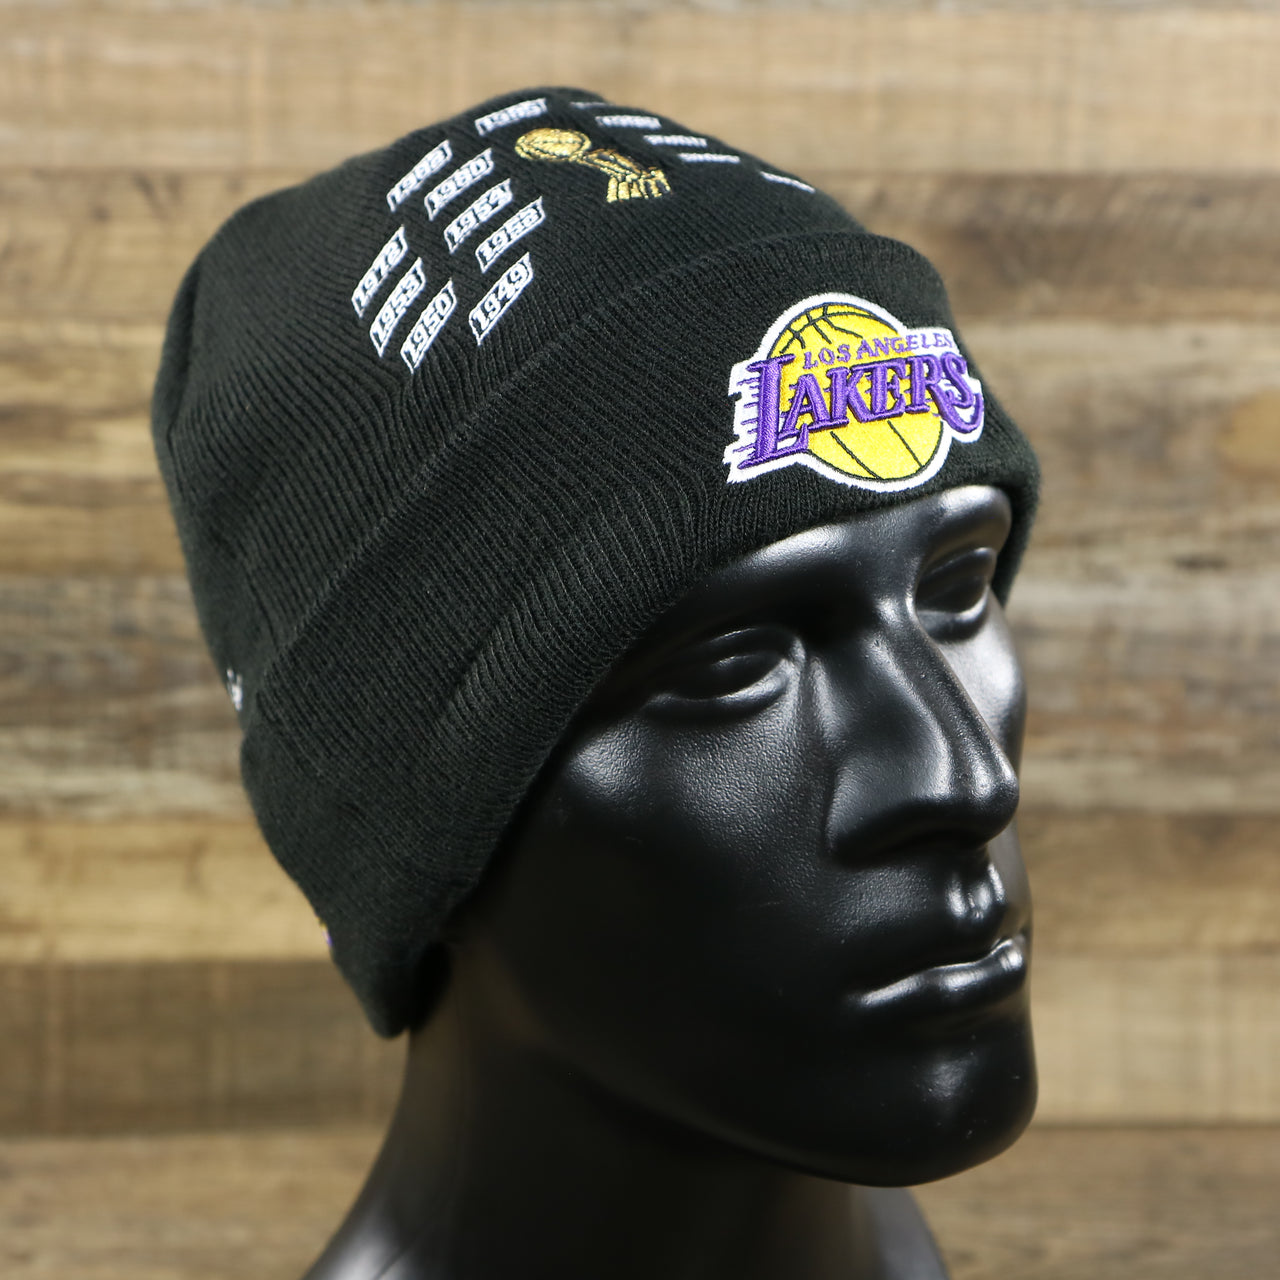 The Los Angeles Lakers All Over NBA Finals Side Patch 17x Champion Knit Cuff Beanie | New Era, Black